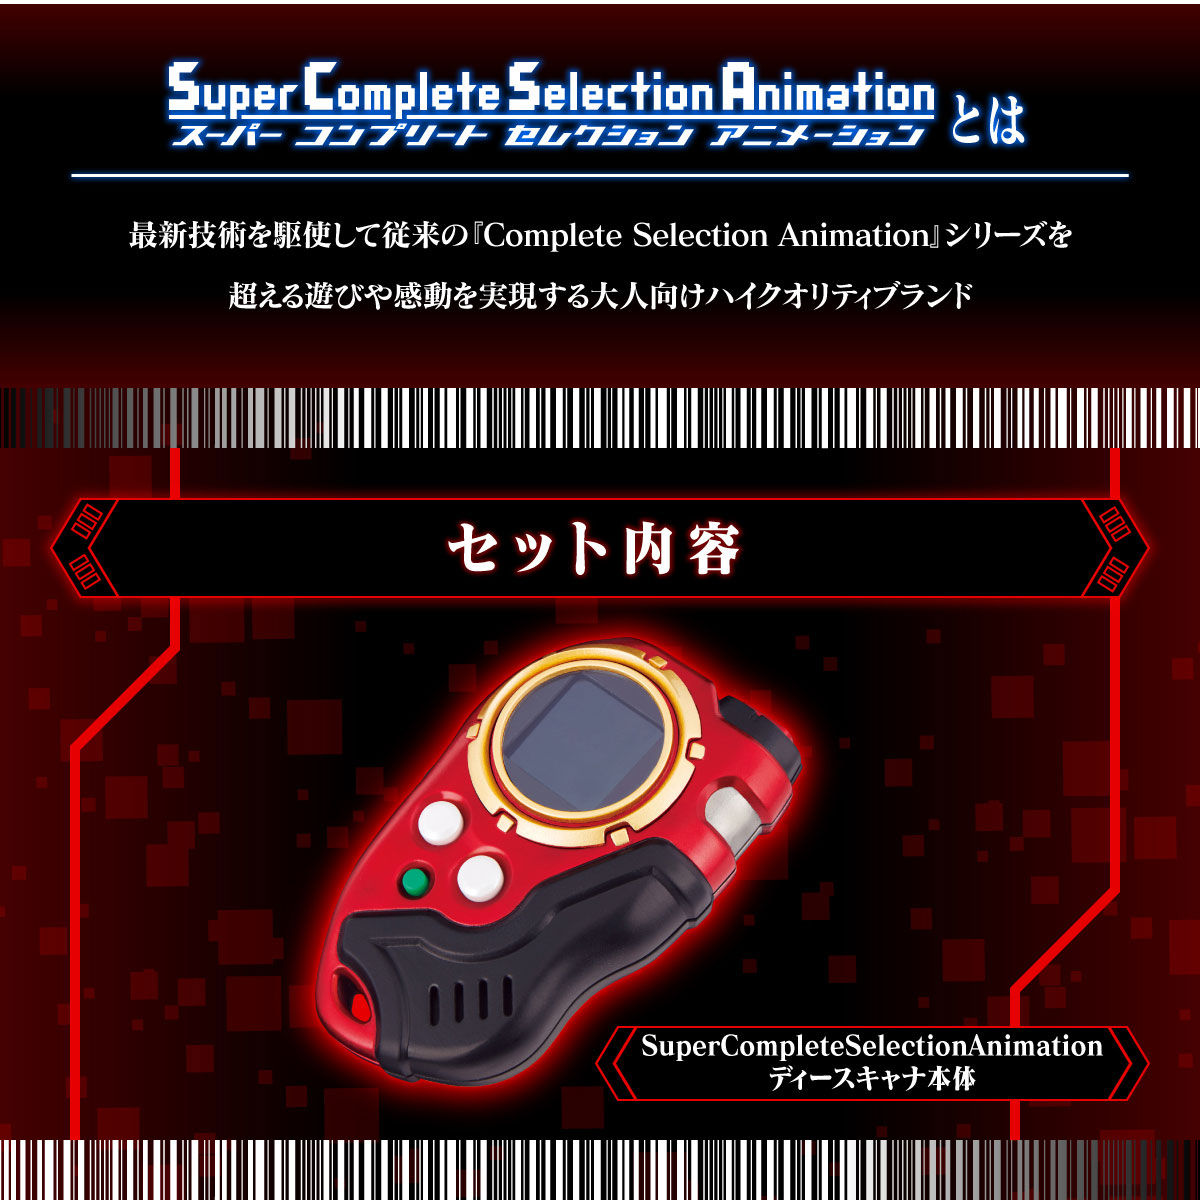 SuperCompleteSelectionAnimation ディースキャナver.ULTIMATE RED